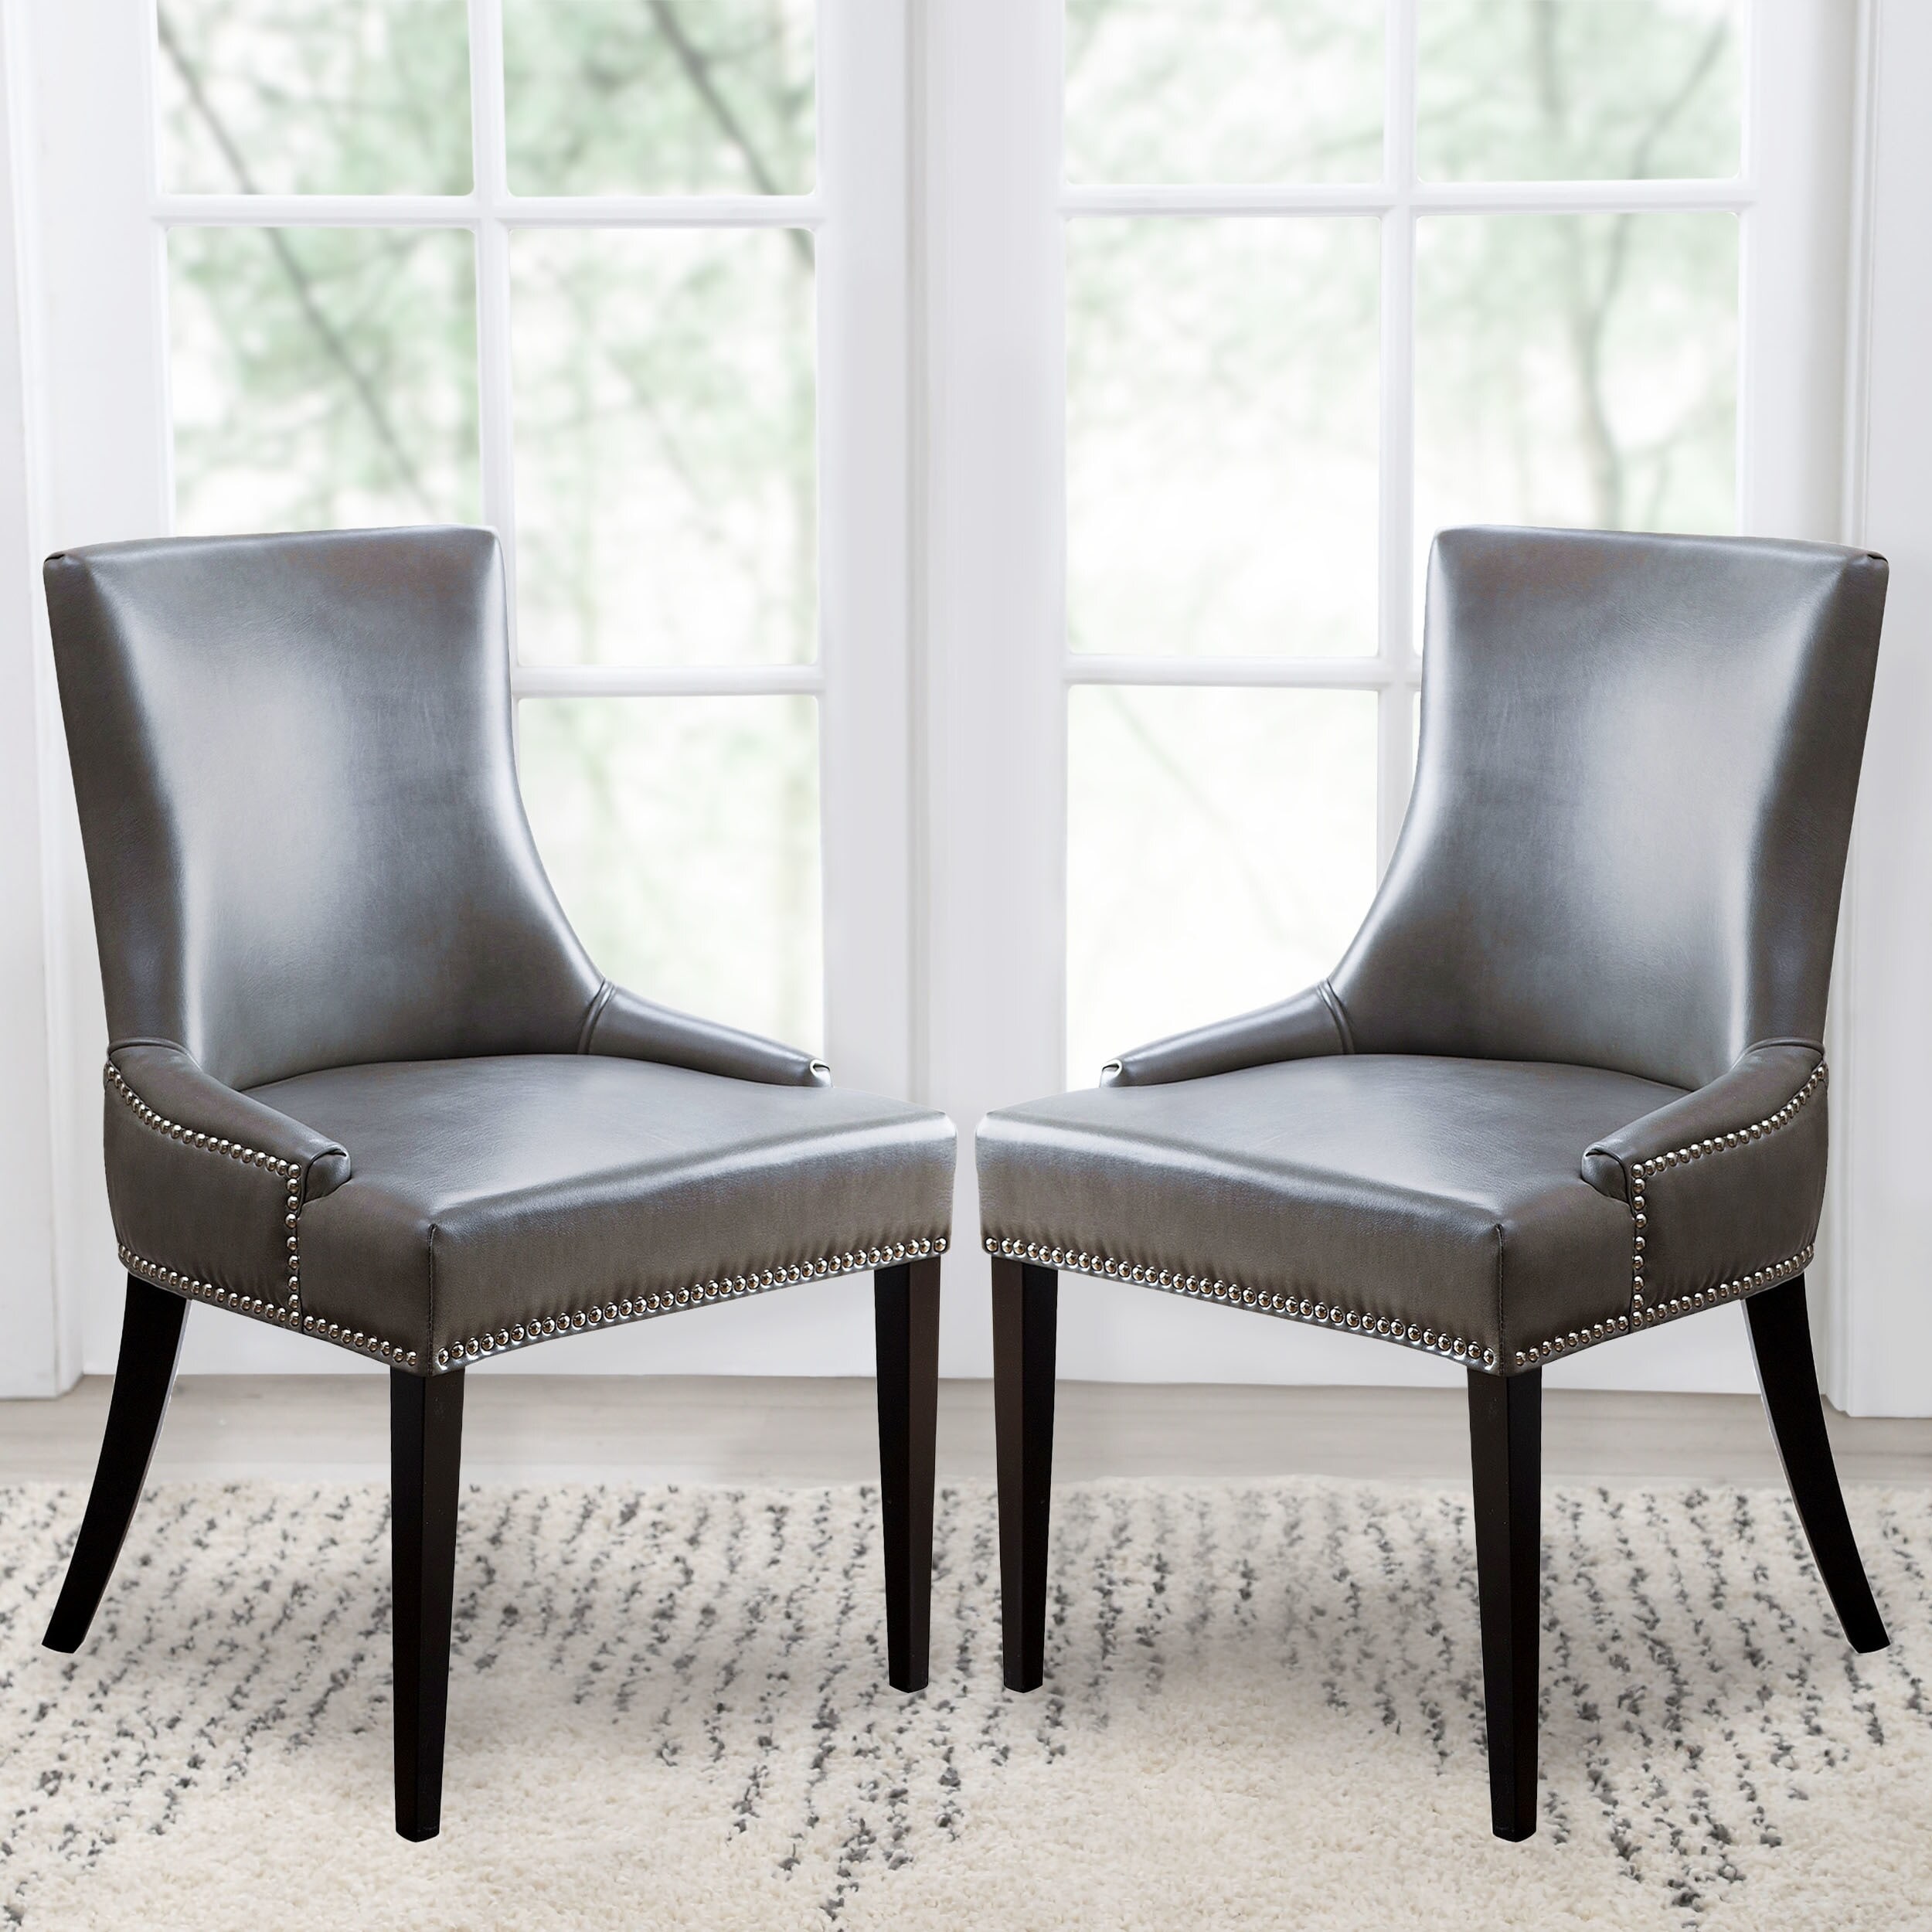 Abbyson Newport Grey Leather Nailhead Trim Dining Chair On Sale Overstock 9963906